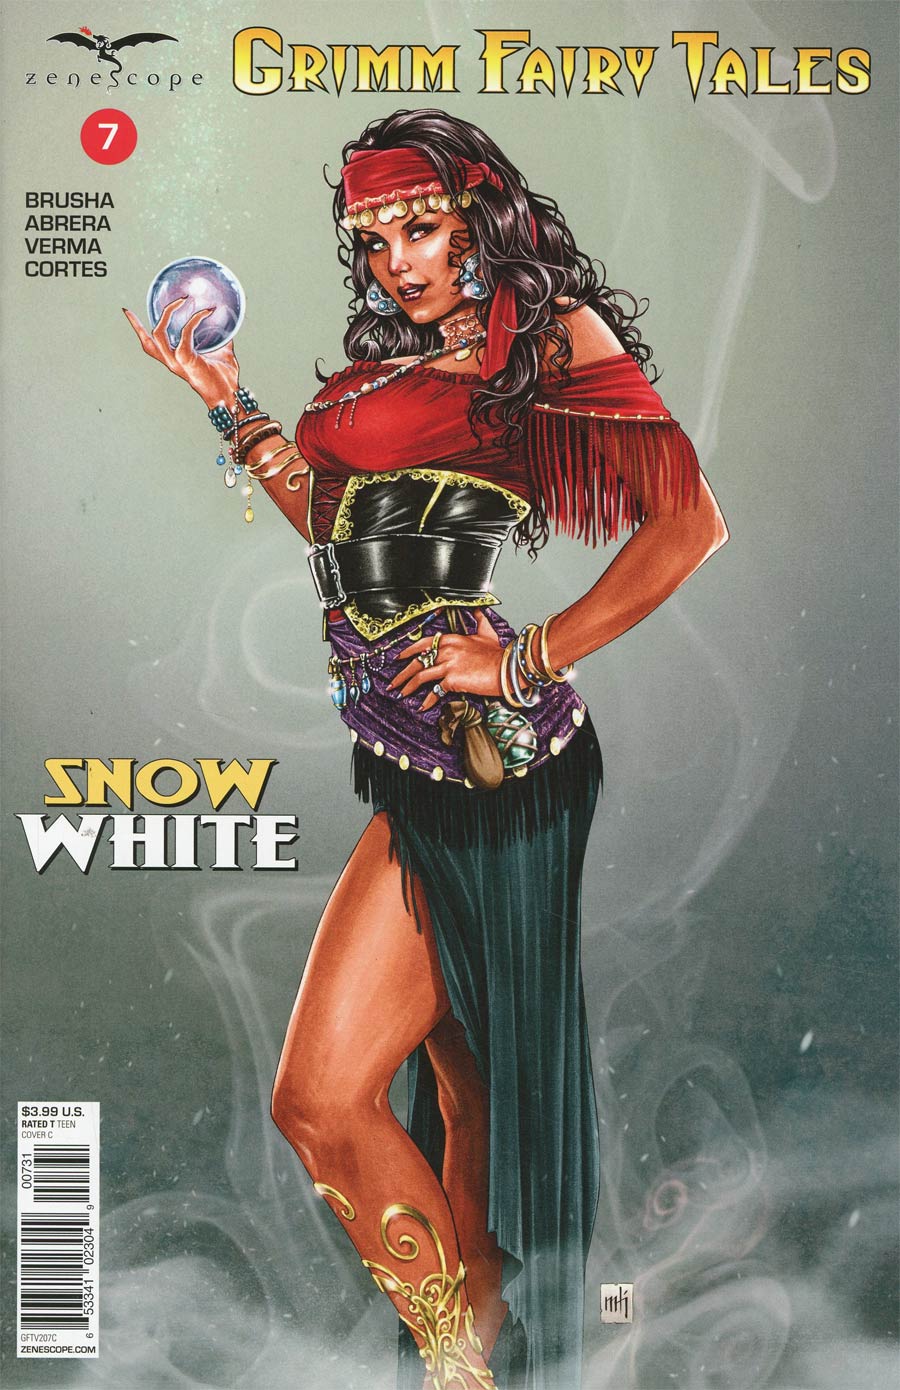 Grimm Fairy Tales Vol 2 #7 Cover C Mike Krome